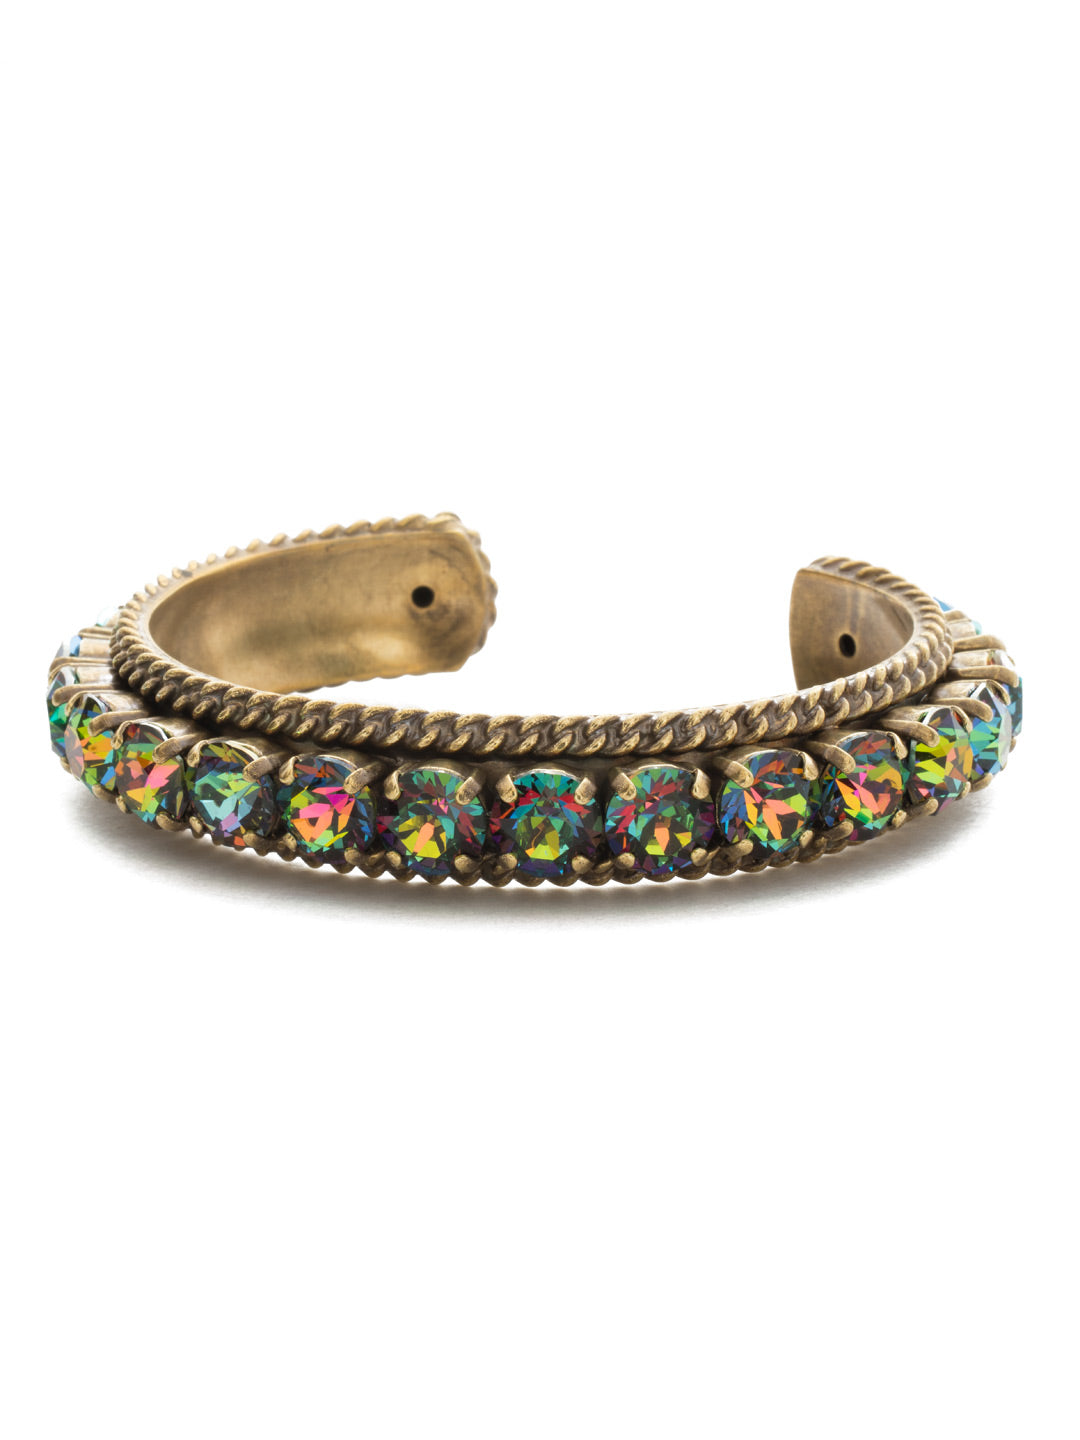 Quintessential Woven Cuff Bracelet - BCN1AGVO - Chic, sweet, and to the point. You'll adore adding this cuff bracelet to your jewelry box. A single row of circular crystals on an ornate band makes this piece the must-have for the season. Go bold or be understated chic, either way you'll shine!